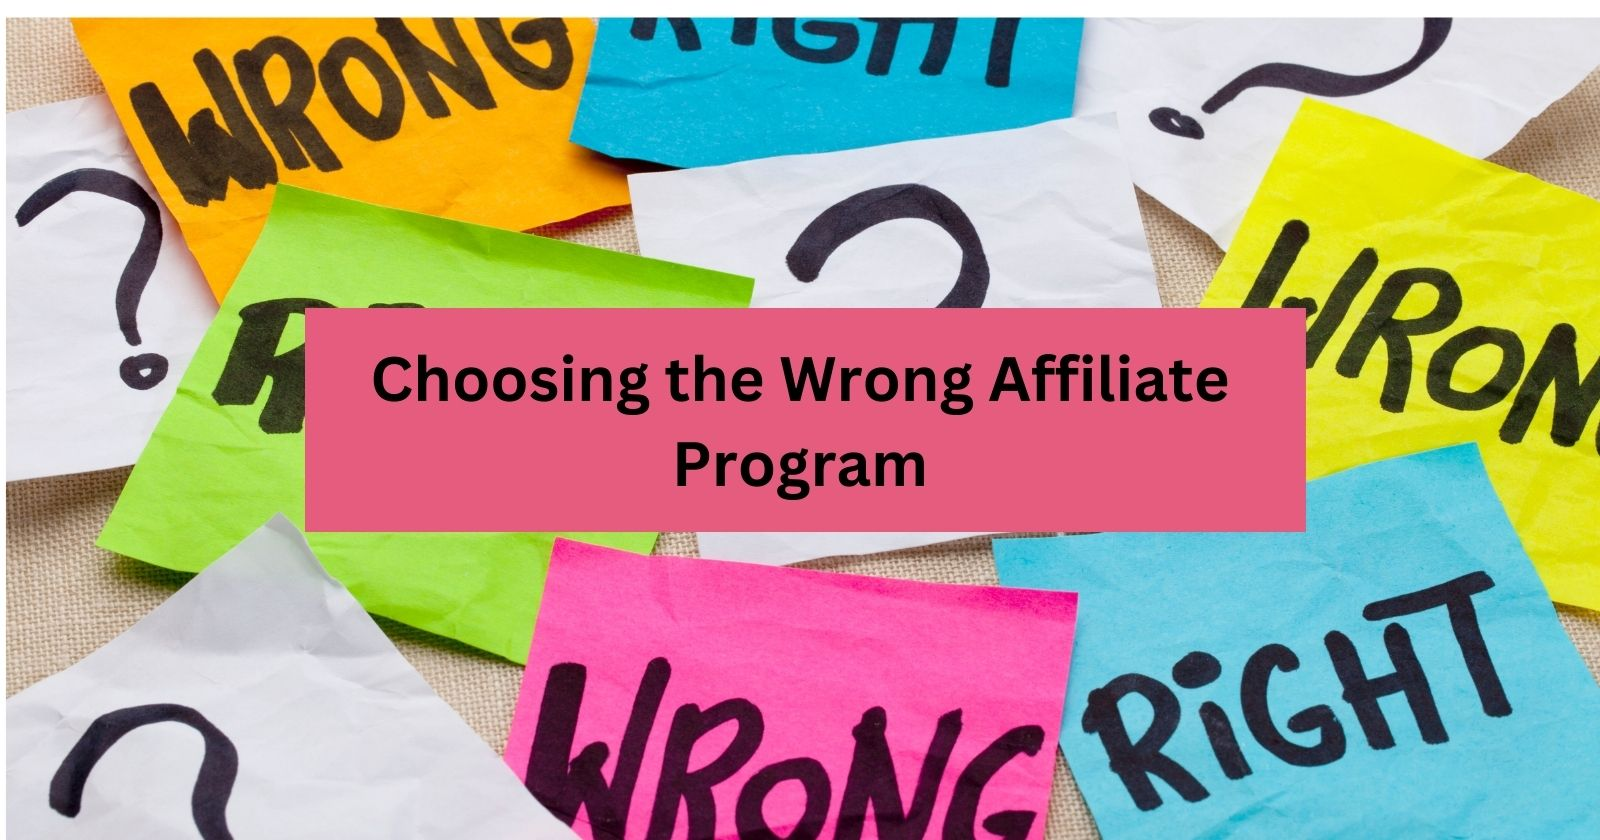 Notes with Text right, Wrong and a text Choosing the wrong affiliate program